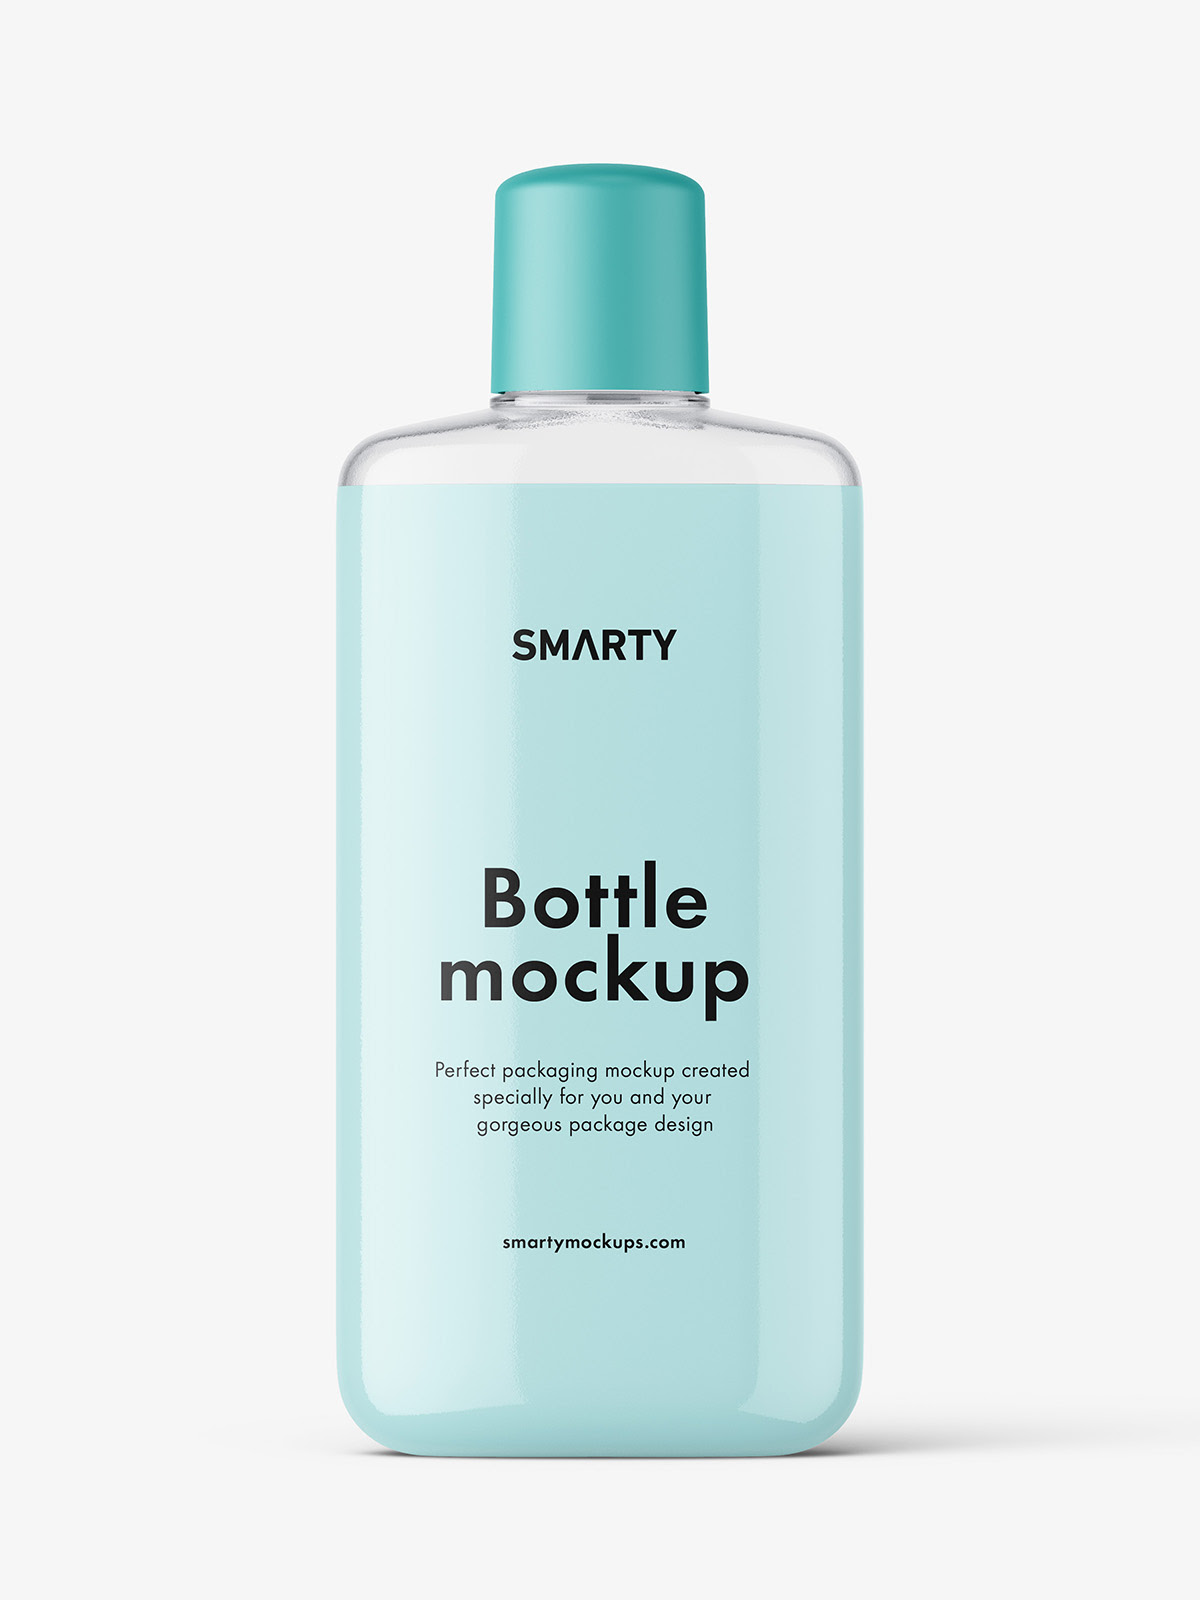 Cream bottle with rounded screwcap mockup Smarty Mockups